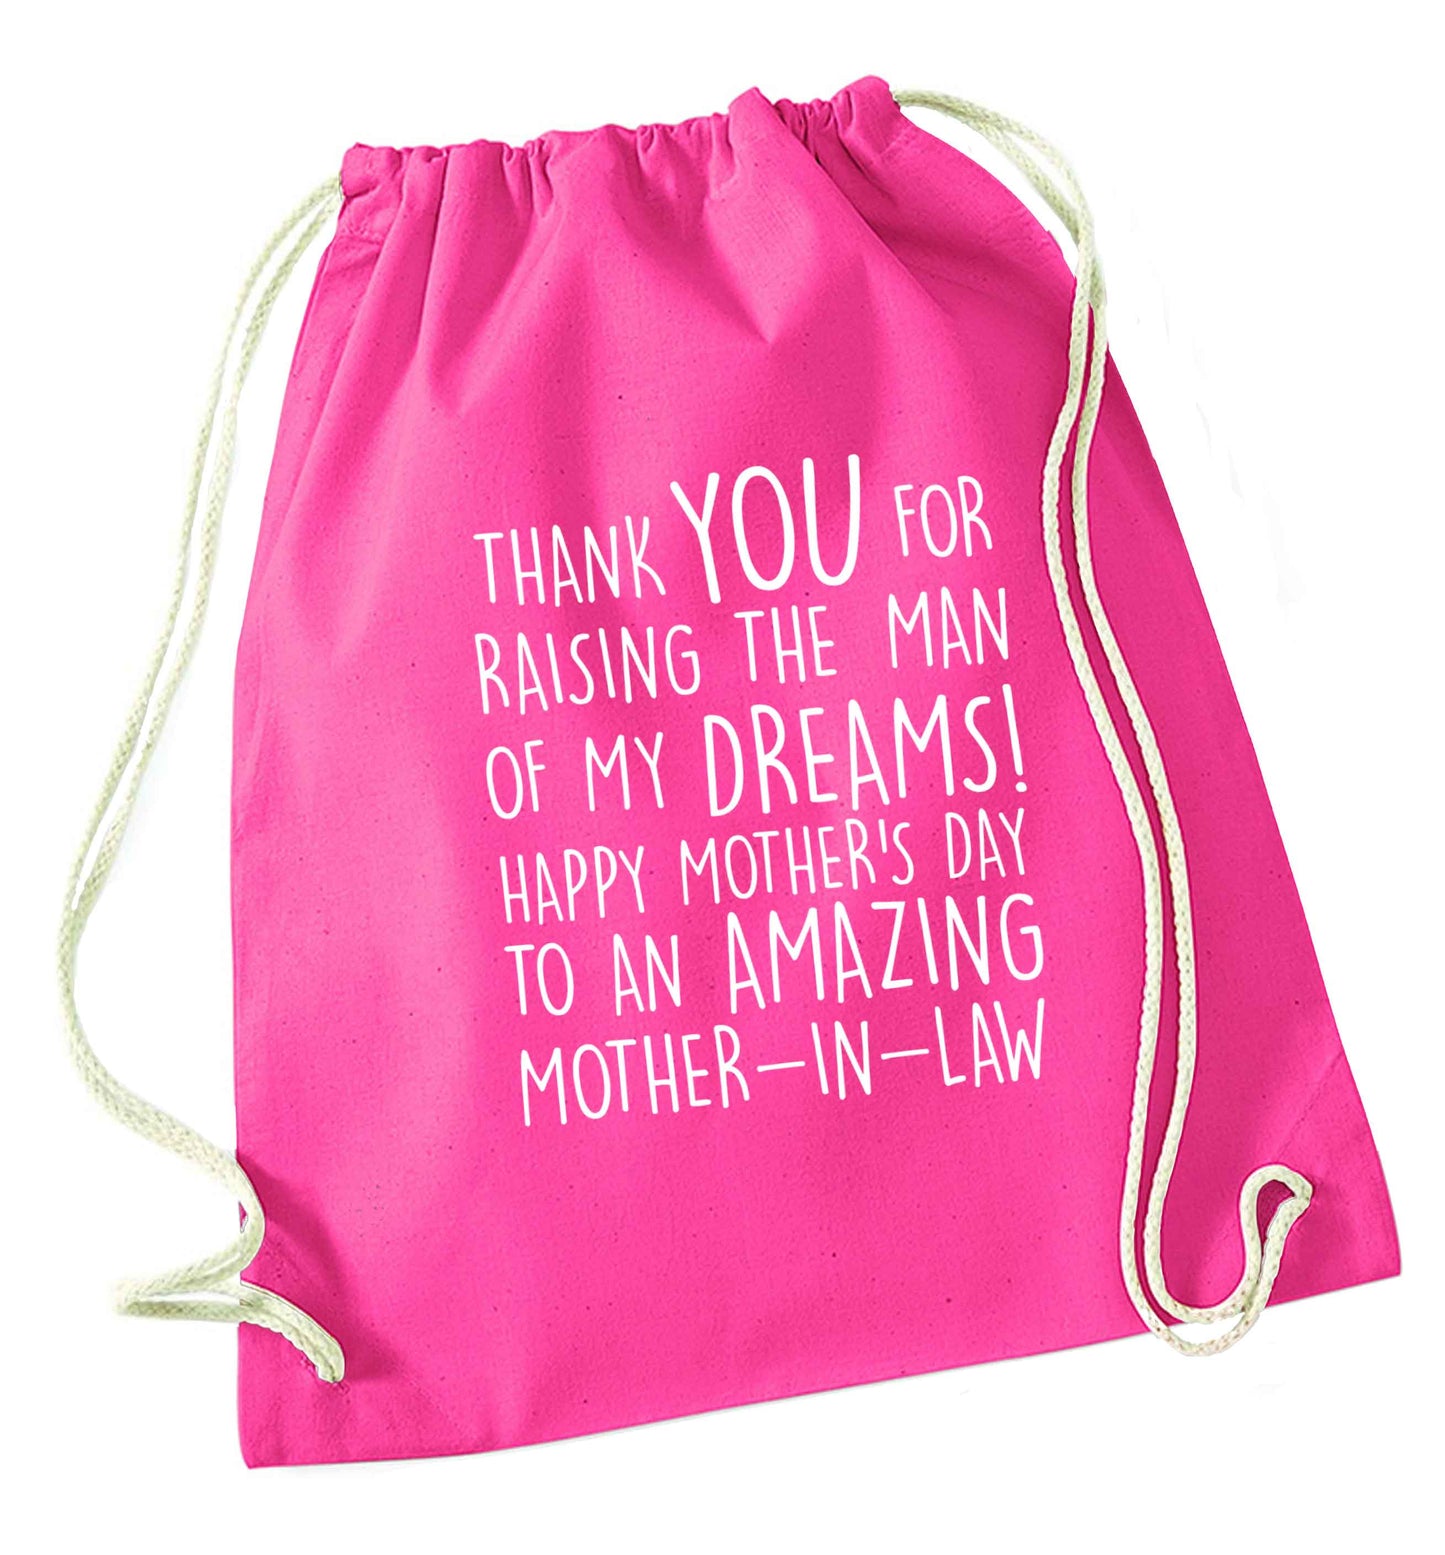 Raising the man of my dreams mother's day mother-in-law pink drawstring bag